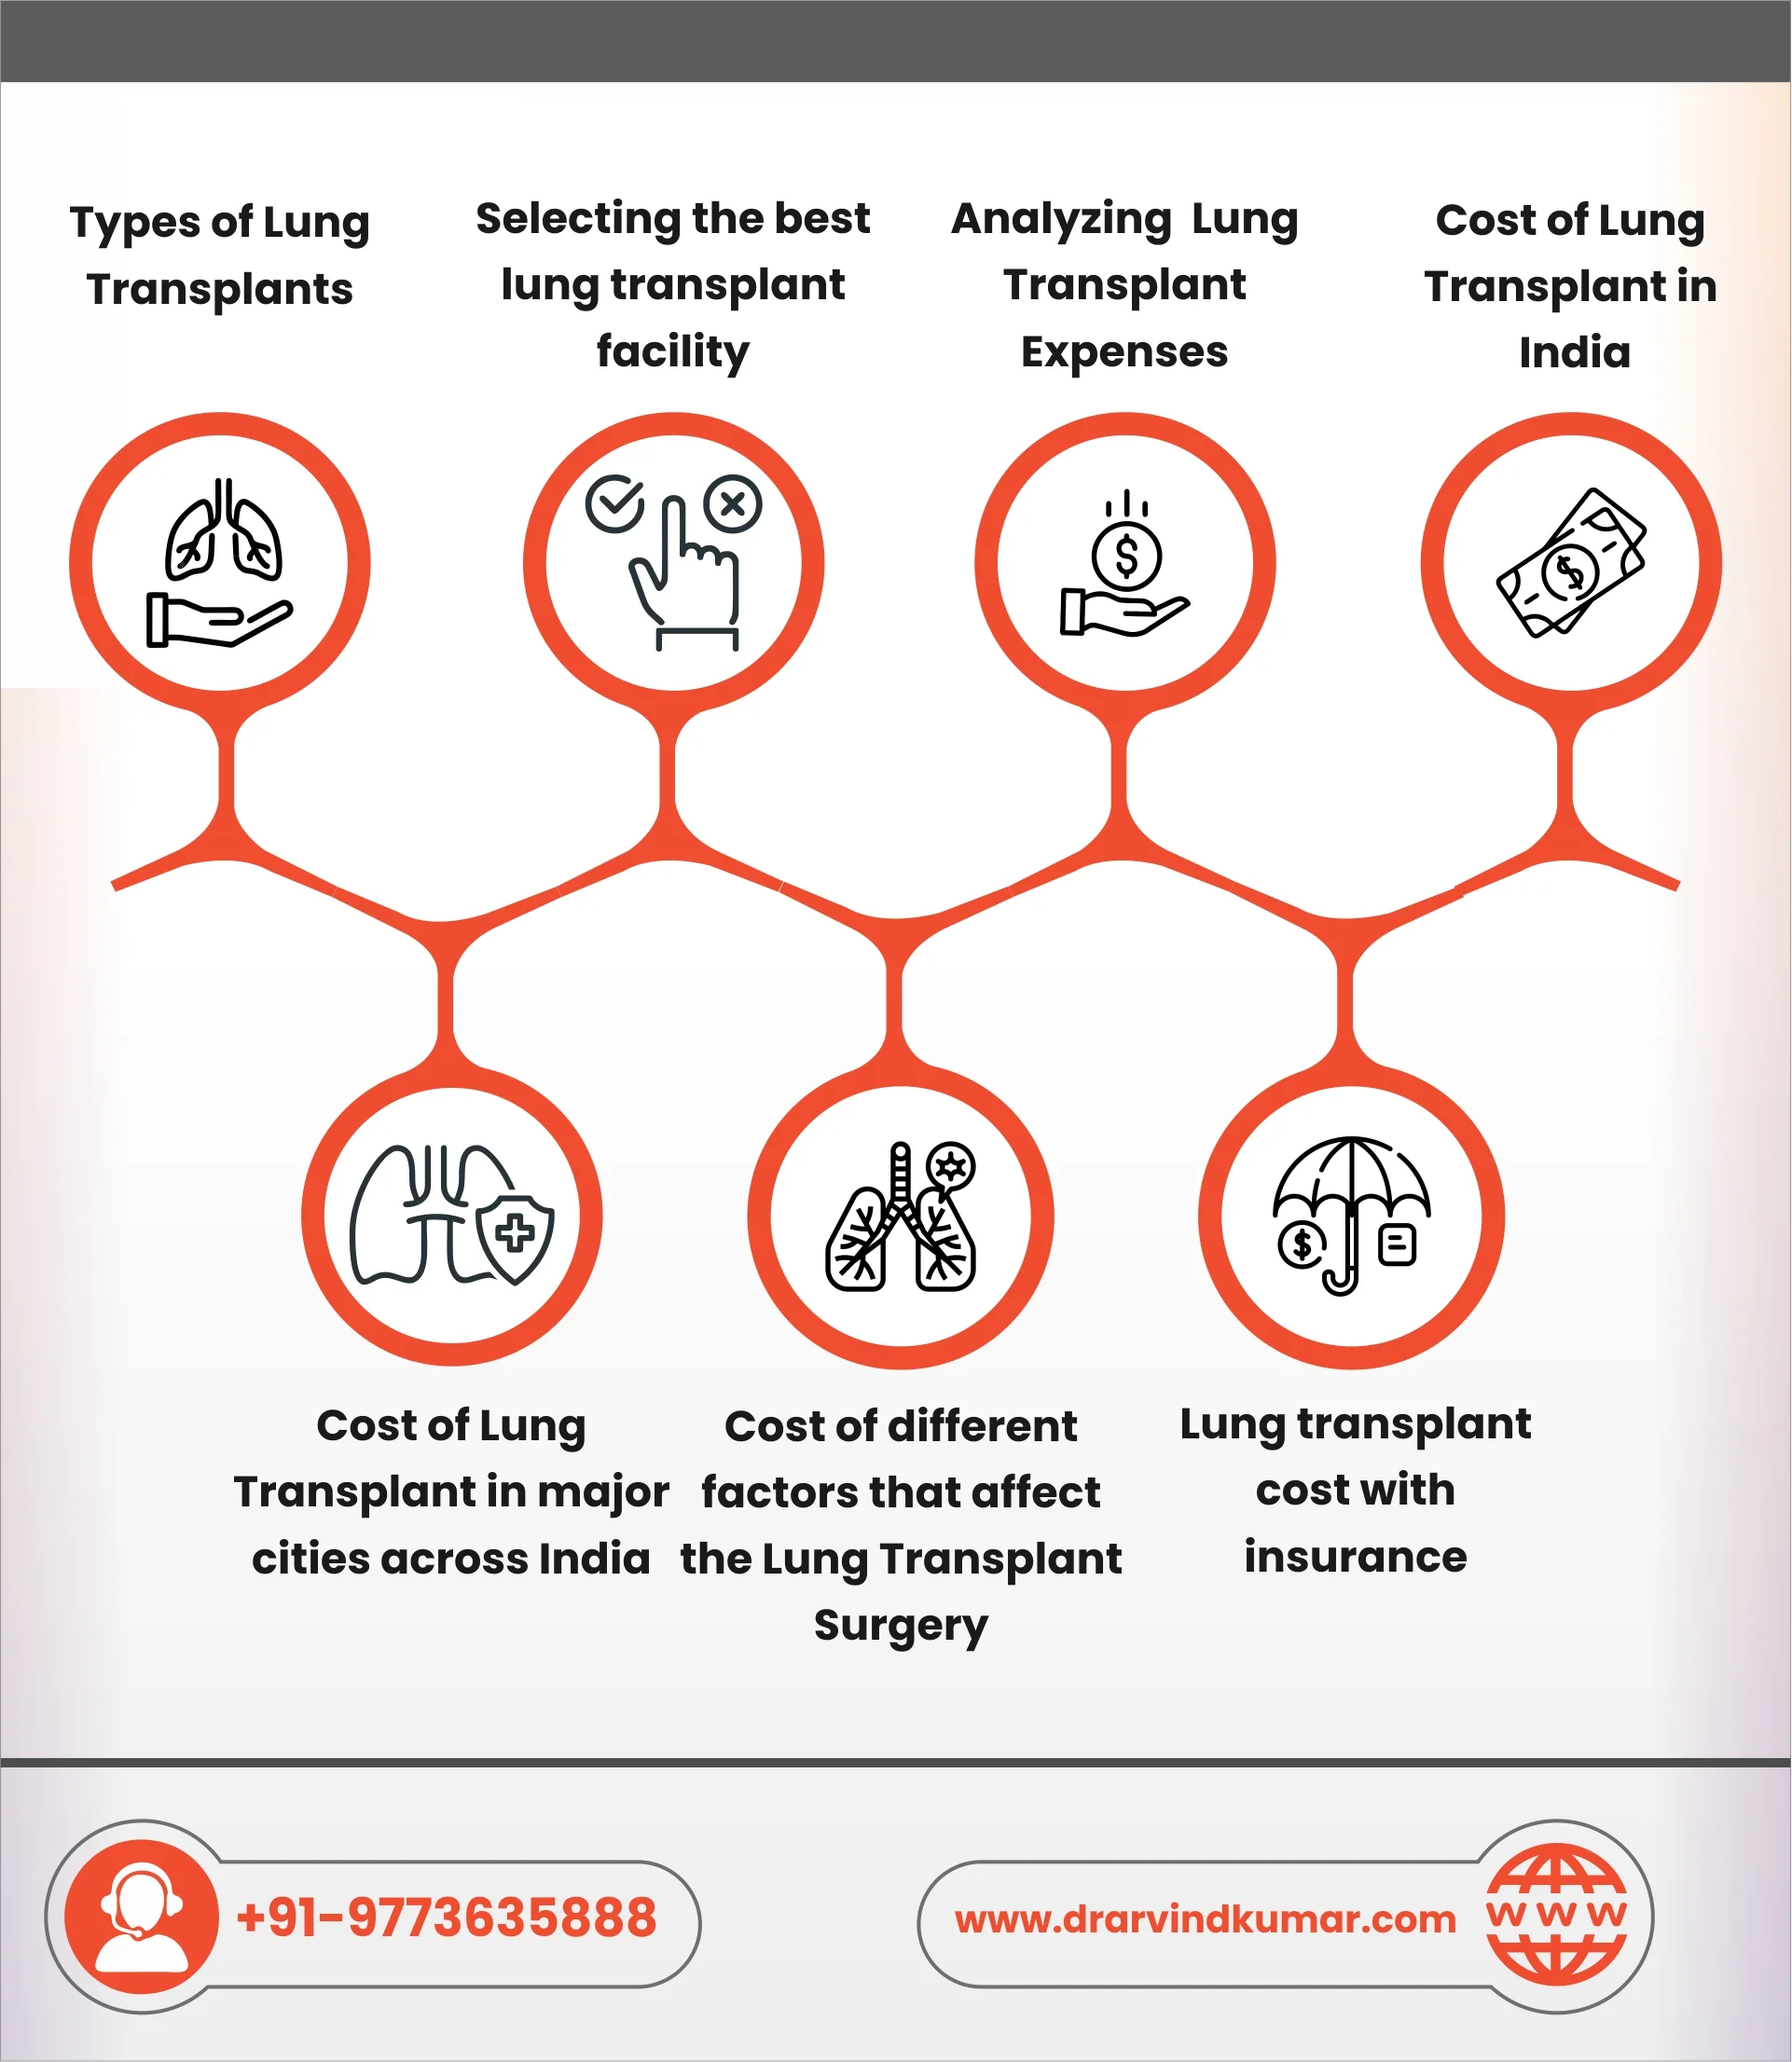 What is the cost of a lung transplant?